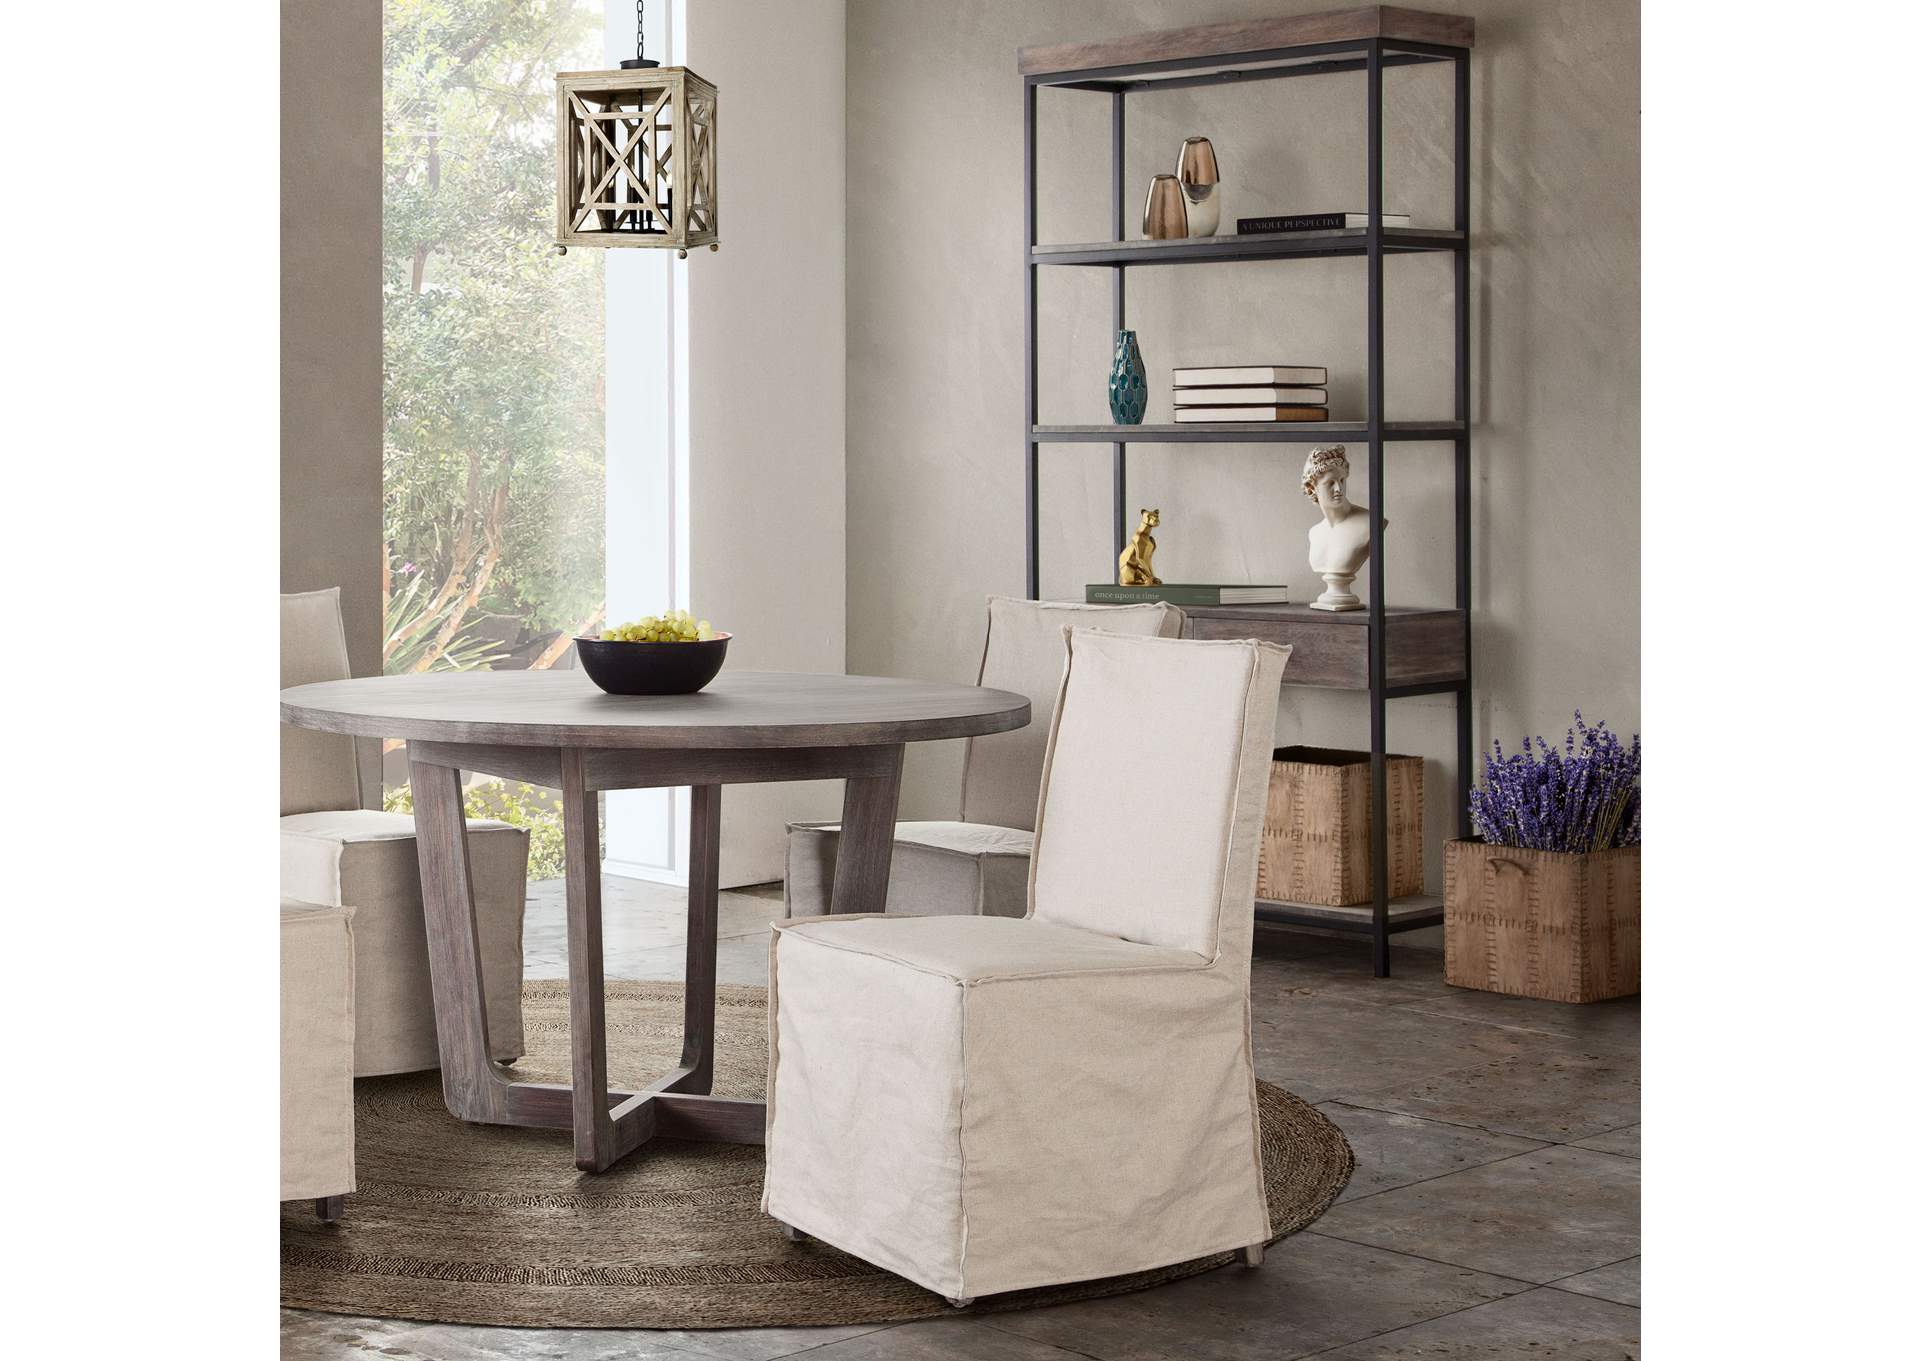 Sonoma 2-Pack Dining Chairs with Wood Legs and Sand Linen Removable Slipcover by Diamond Sofa,Diamond Sofa